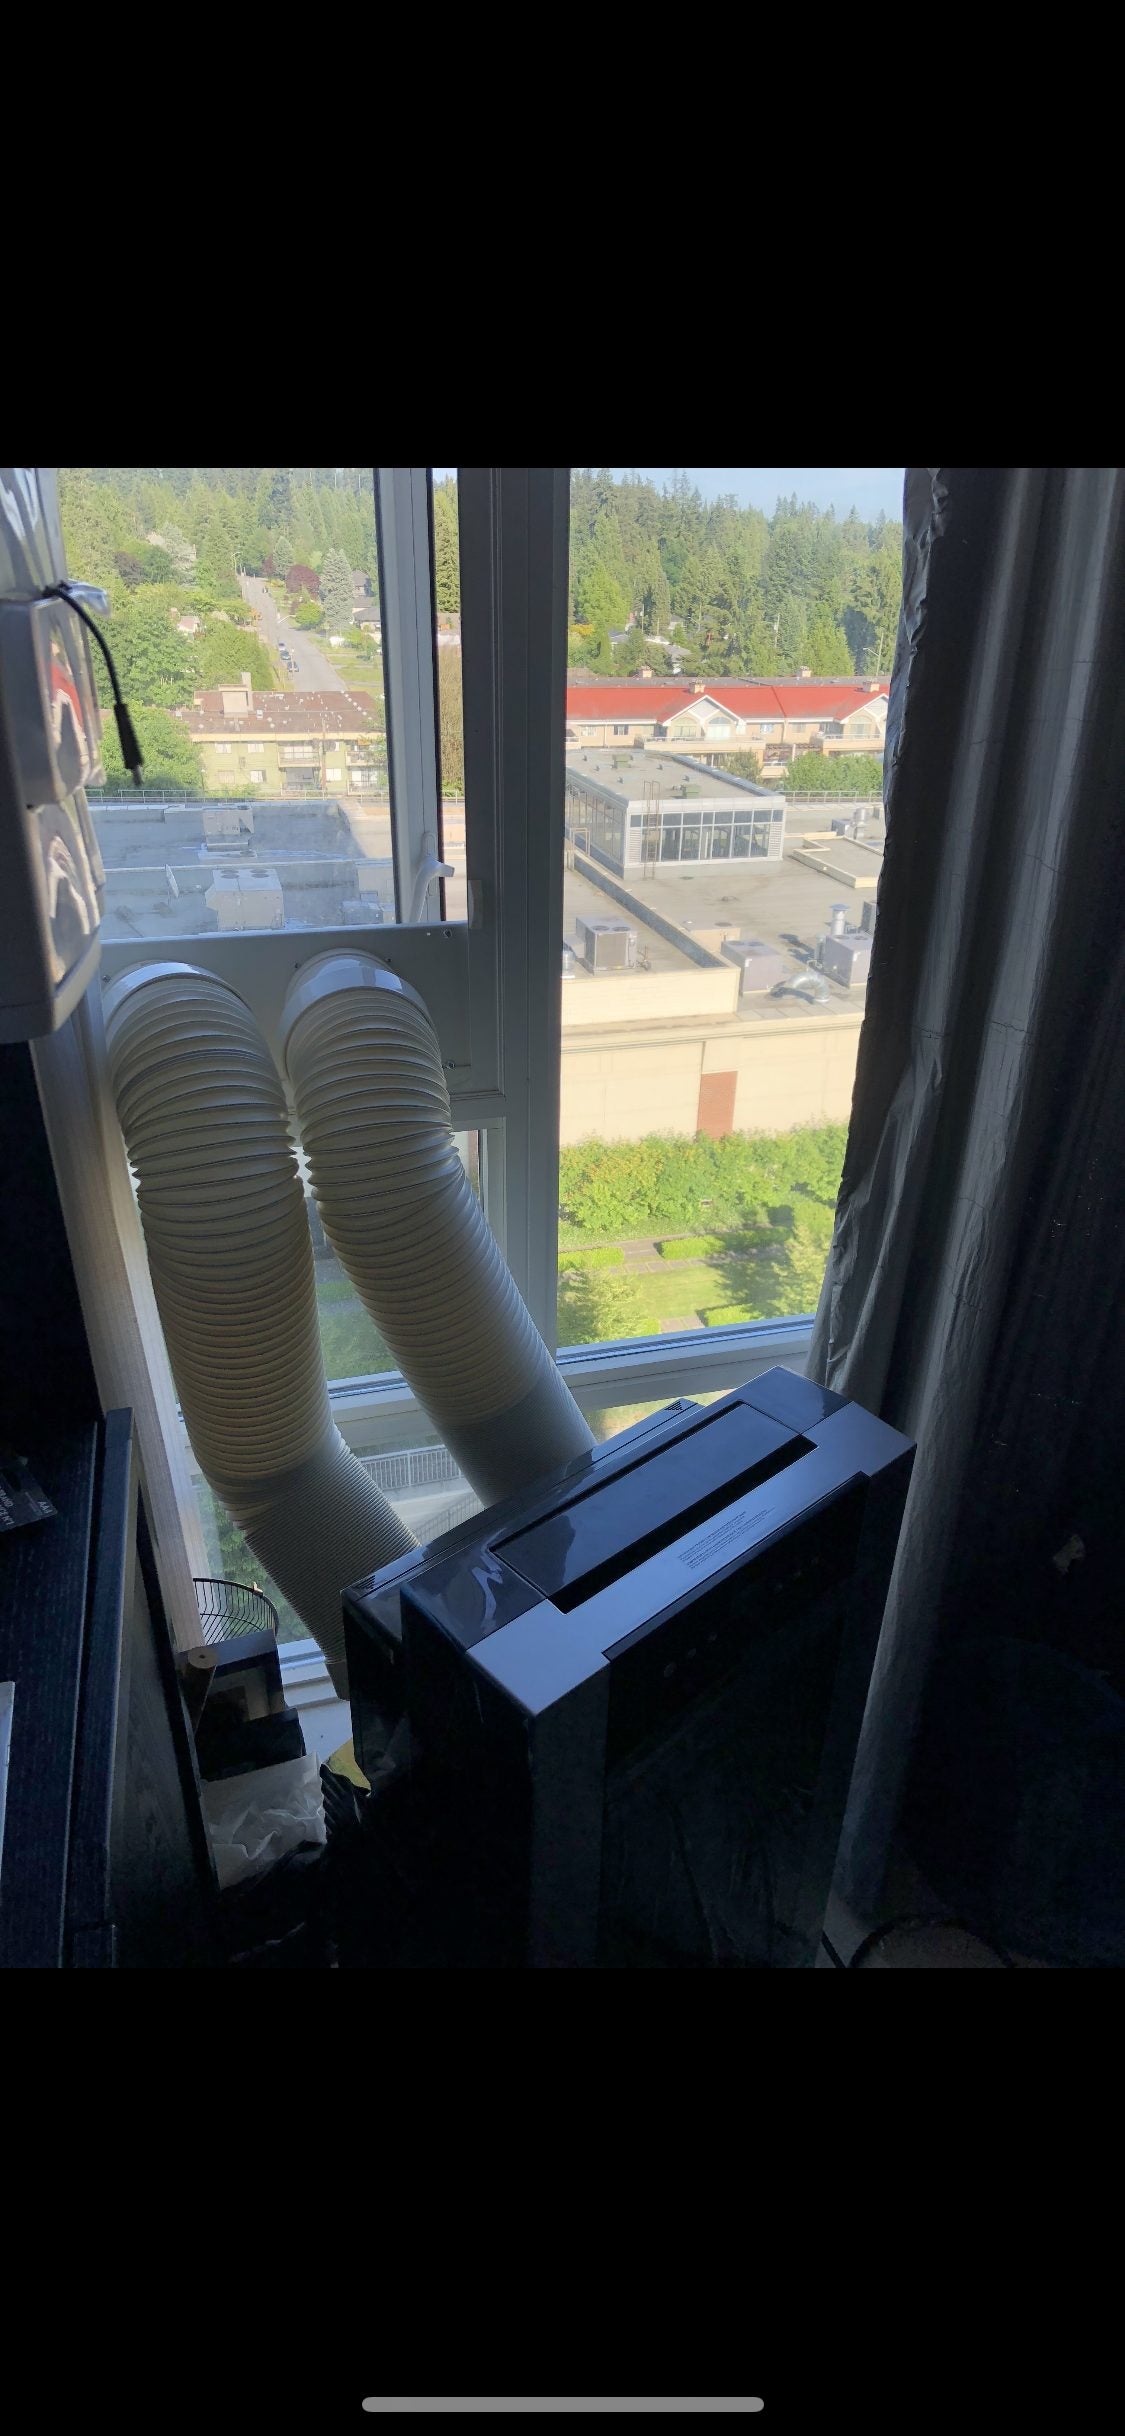 How To Put An Air Conditioner In A Crank Window installing portable air conditioner in crank window - RedFlagDeals.com  Forums